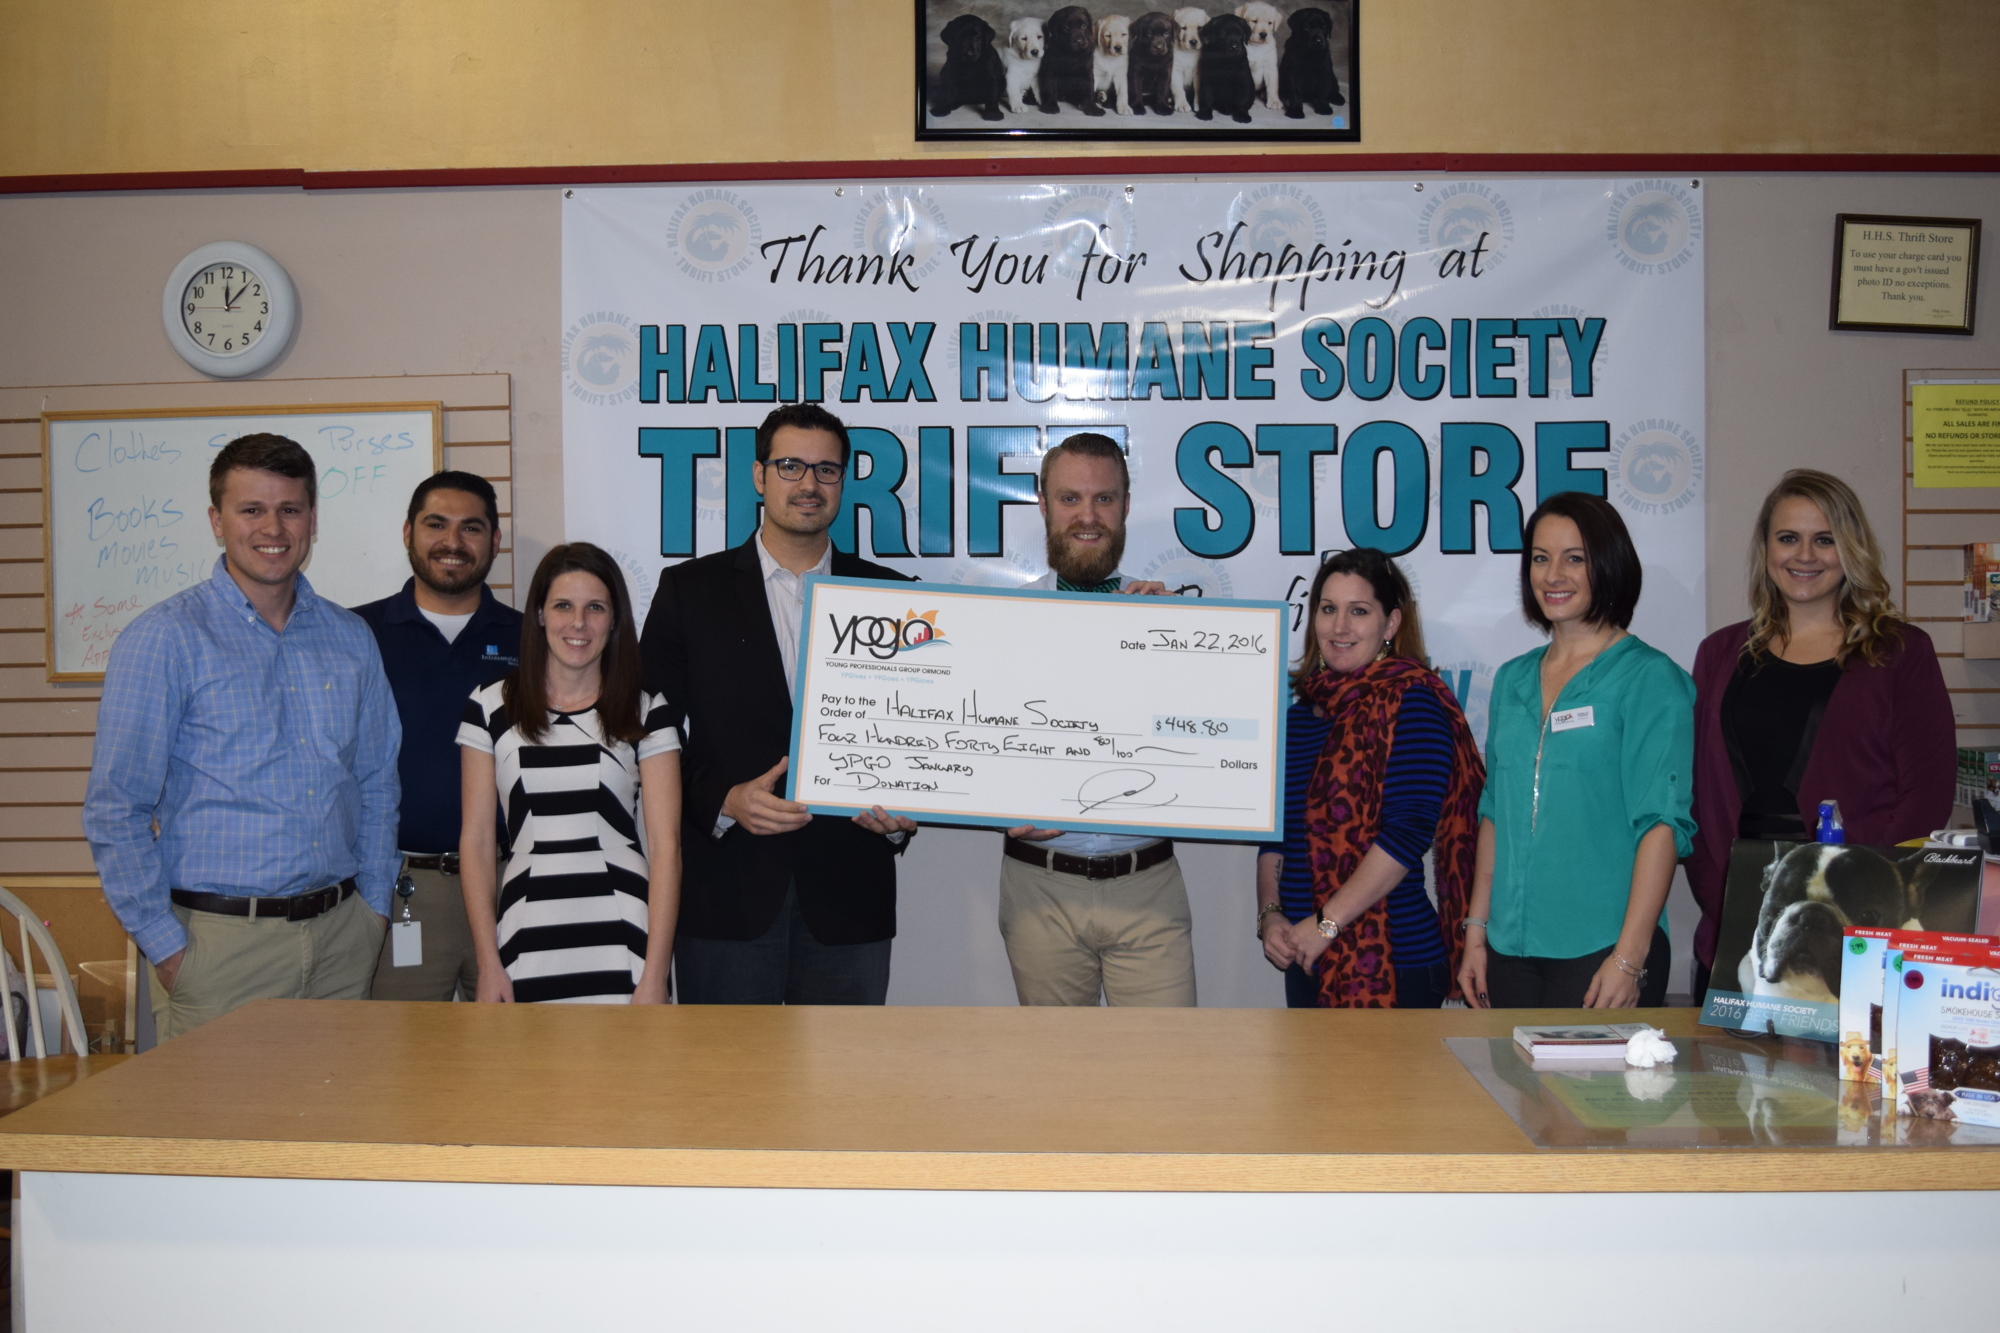 YPGO donated $448.80 to Halifax Humane Society. Proceeds came from an event on Jan. 7 at Las Bistro. Left to right: Josh McPherson, Andy Barboza, Christina Cassidy, Michael Ugarte., Andrew Gall, Meg Evans, Jenelle Codianne and Alex Middleton.